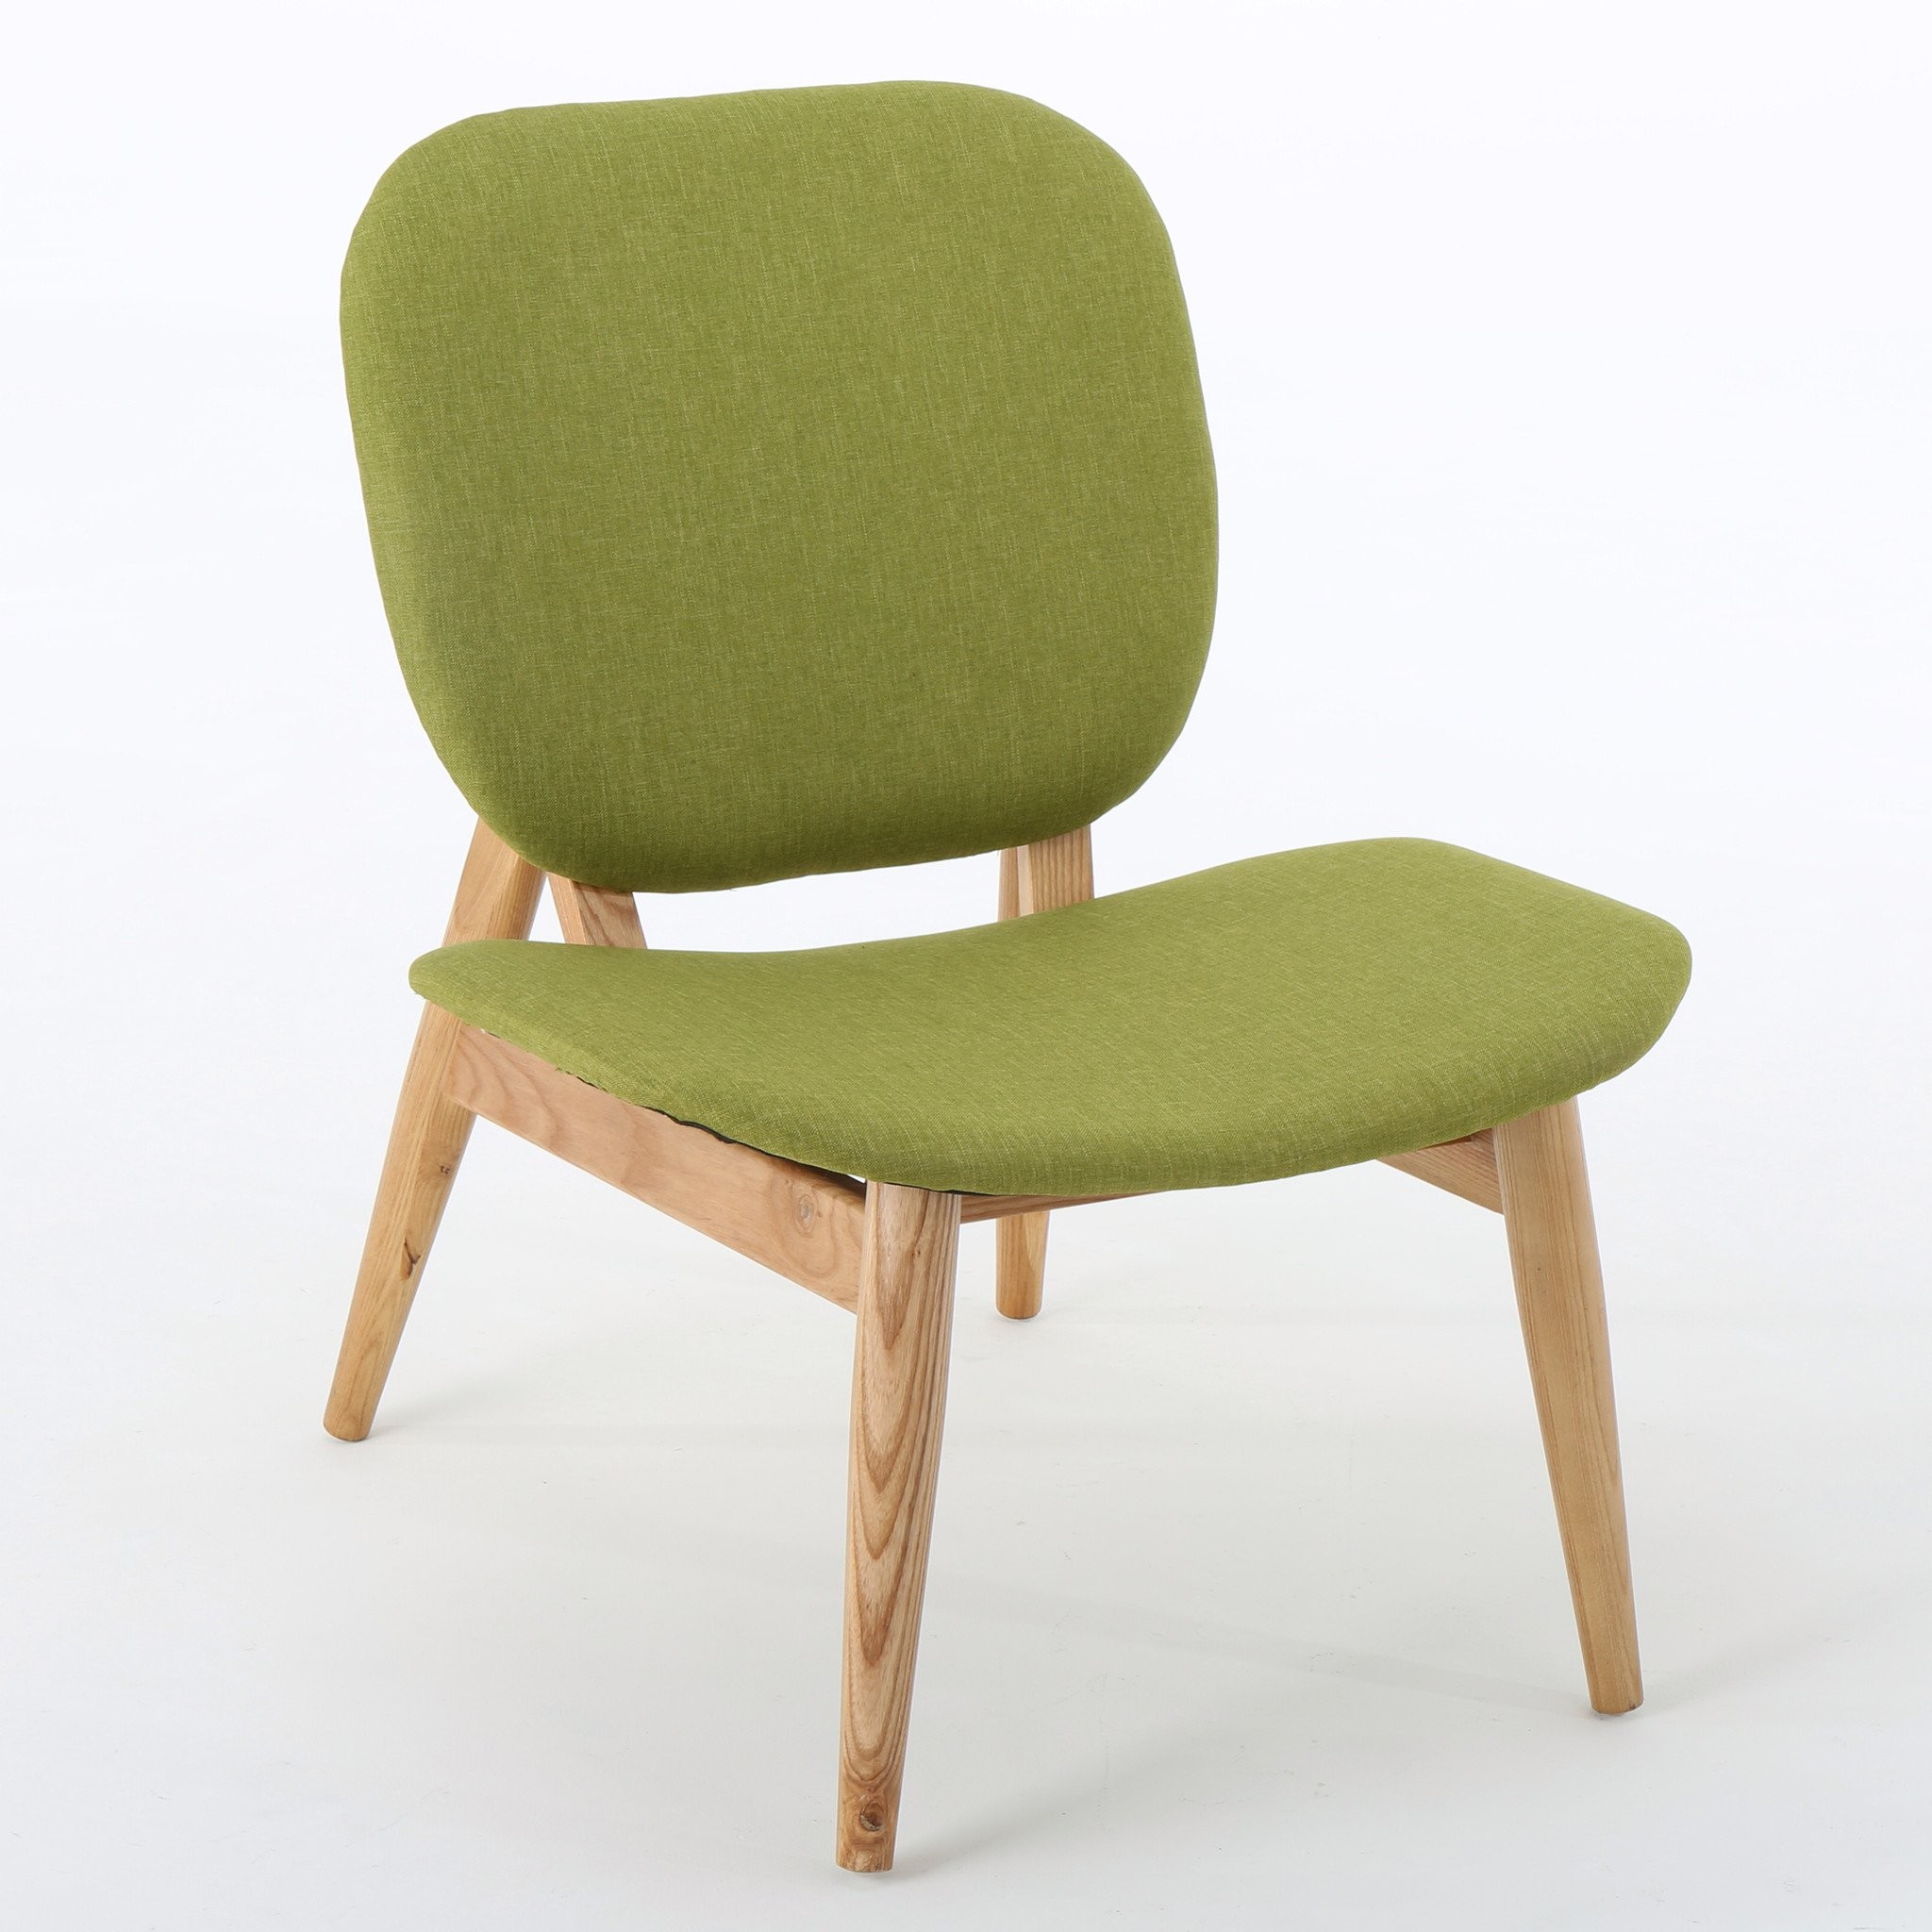 Saevish Contemporary Green Fabric Accent Chair